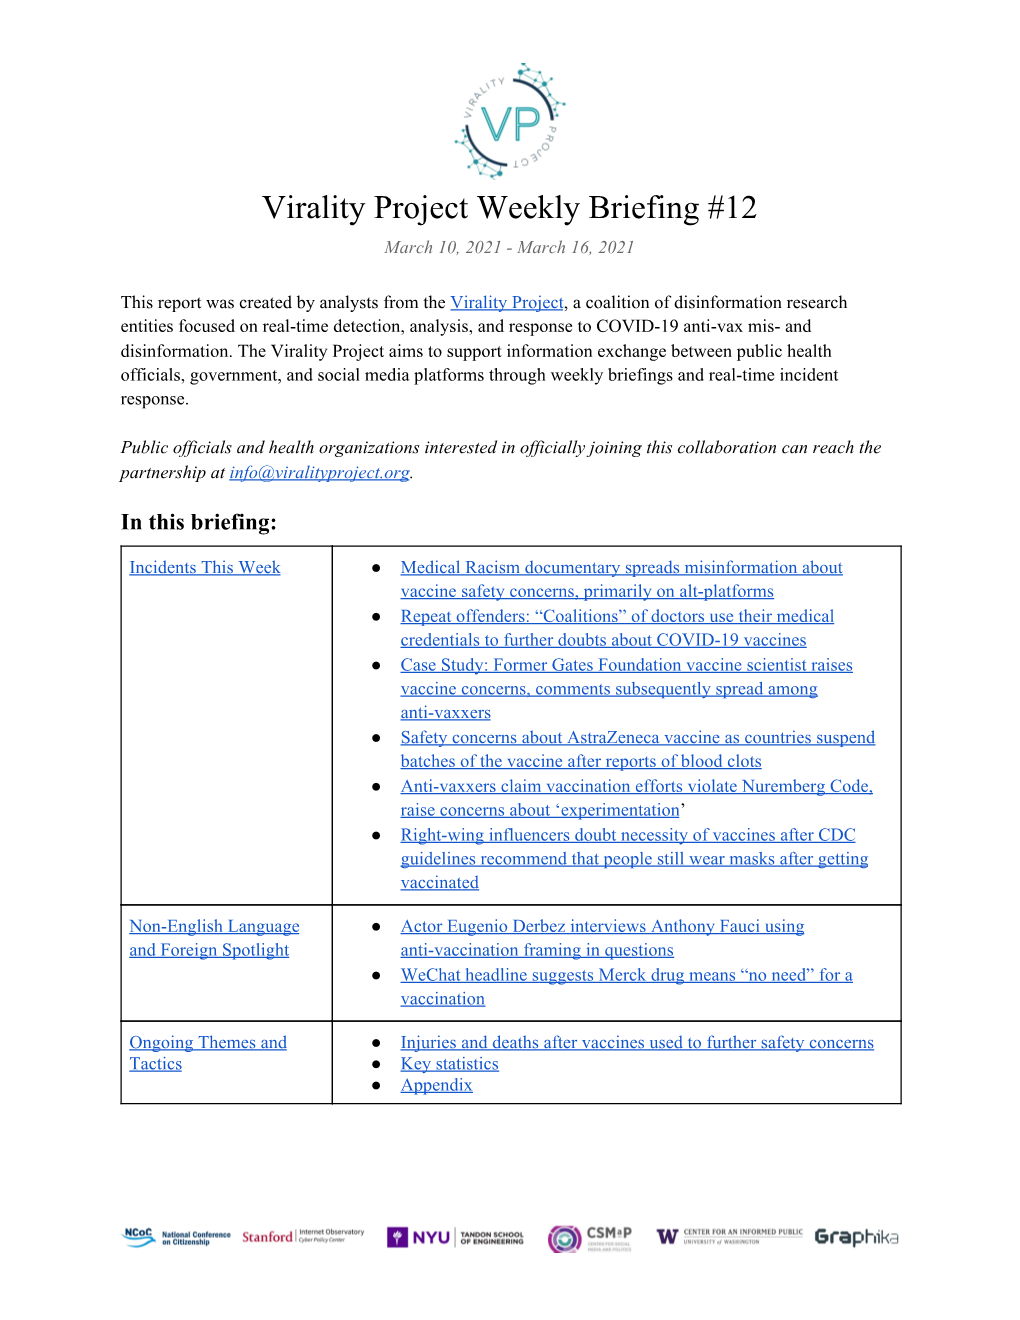 Virality Project Weekly Briefing 12